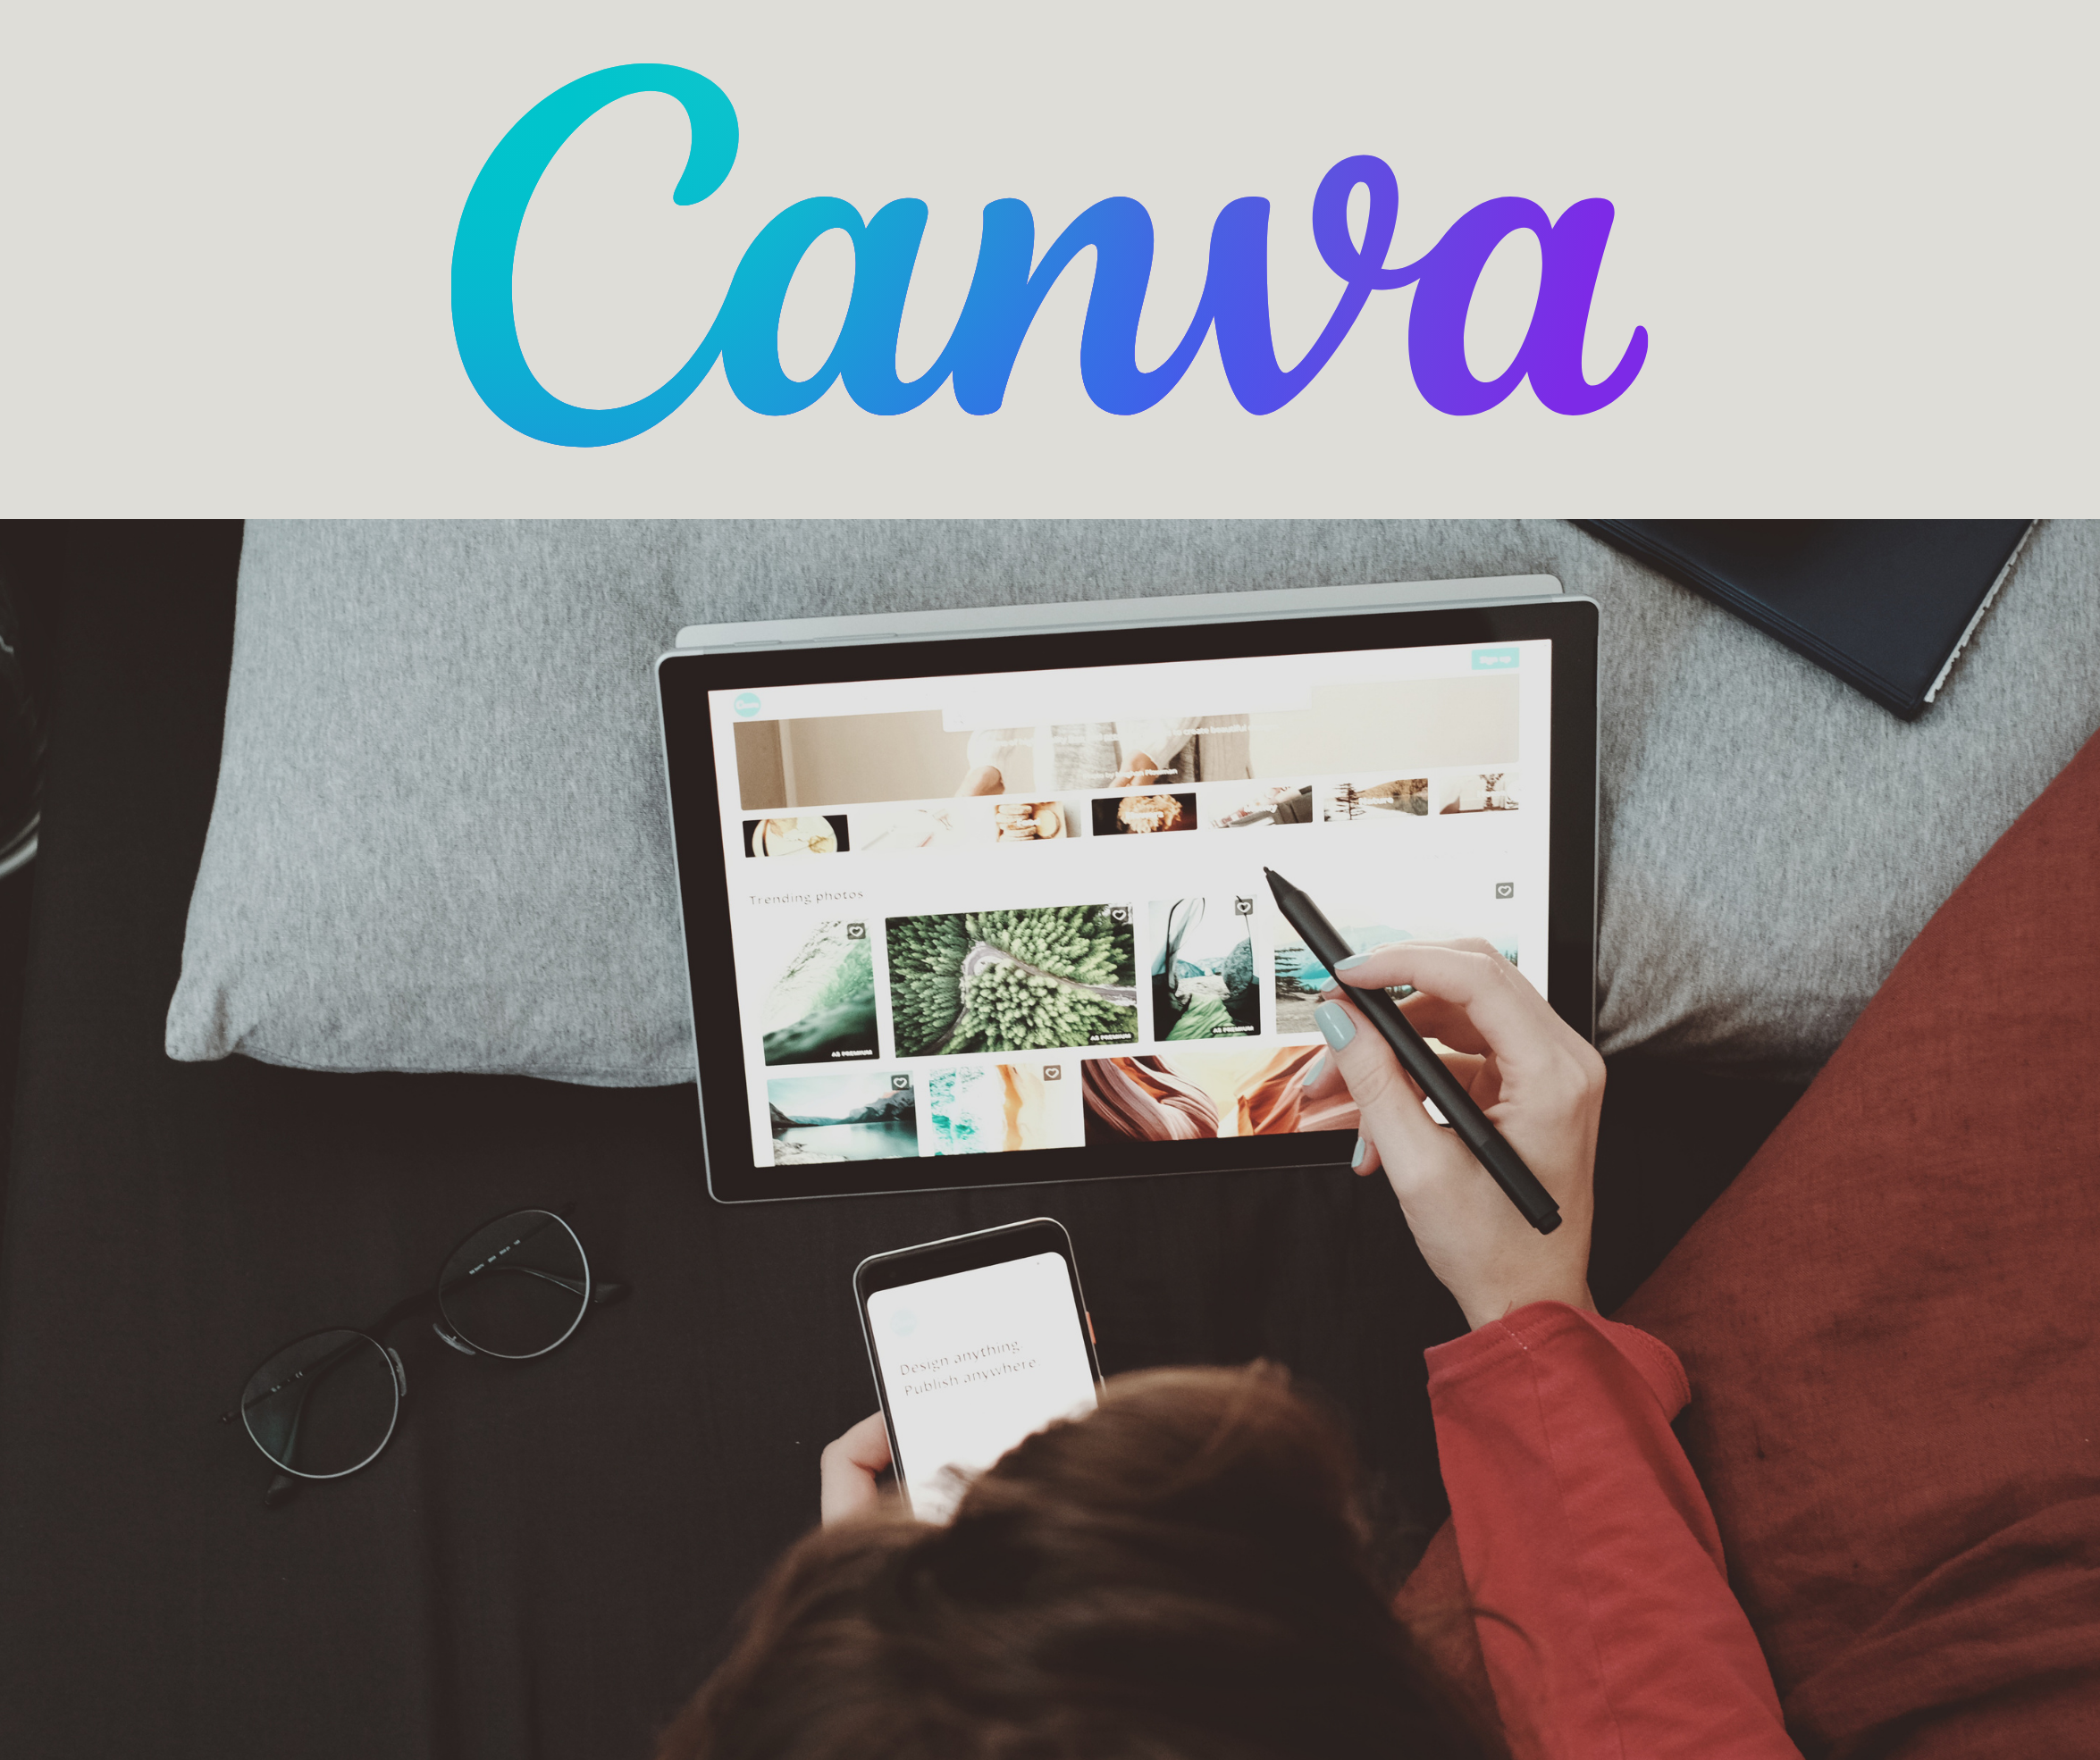 Text: Canva. Images shows a woman using the Canva program on a desktop computer.